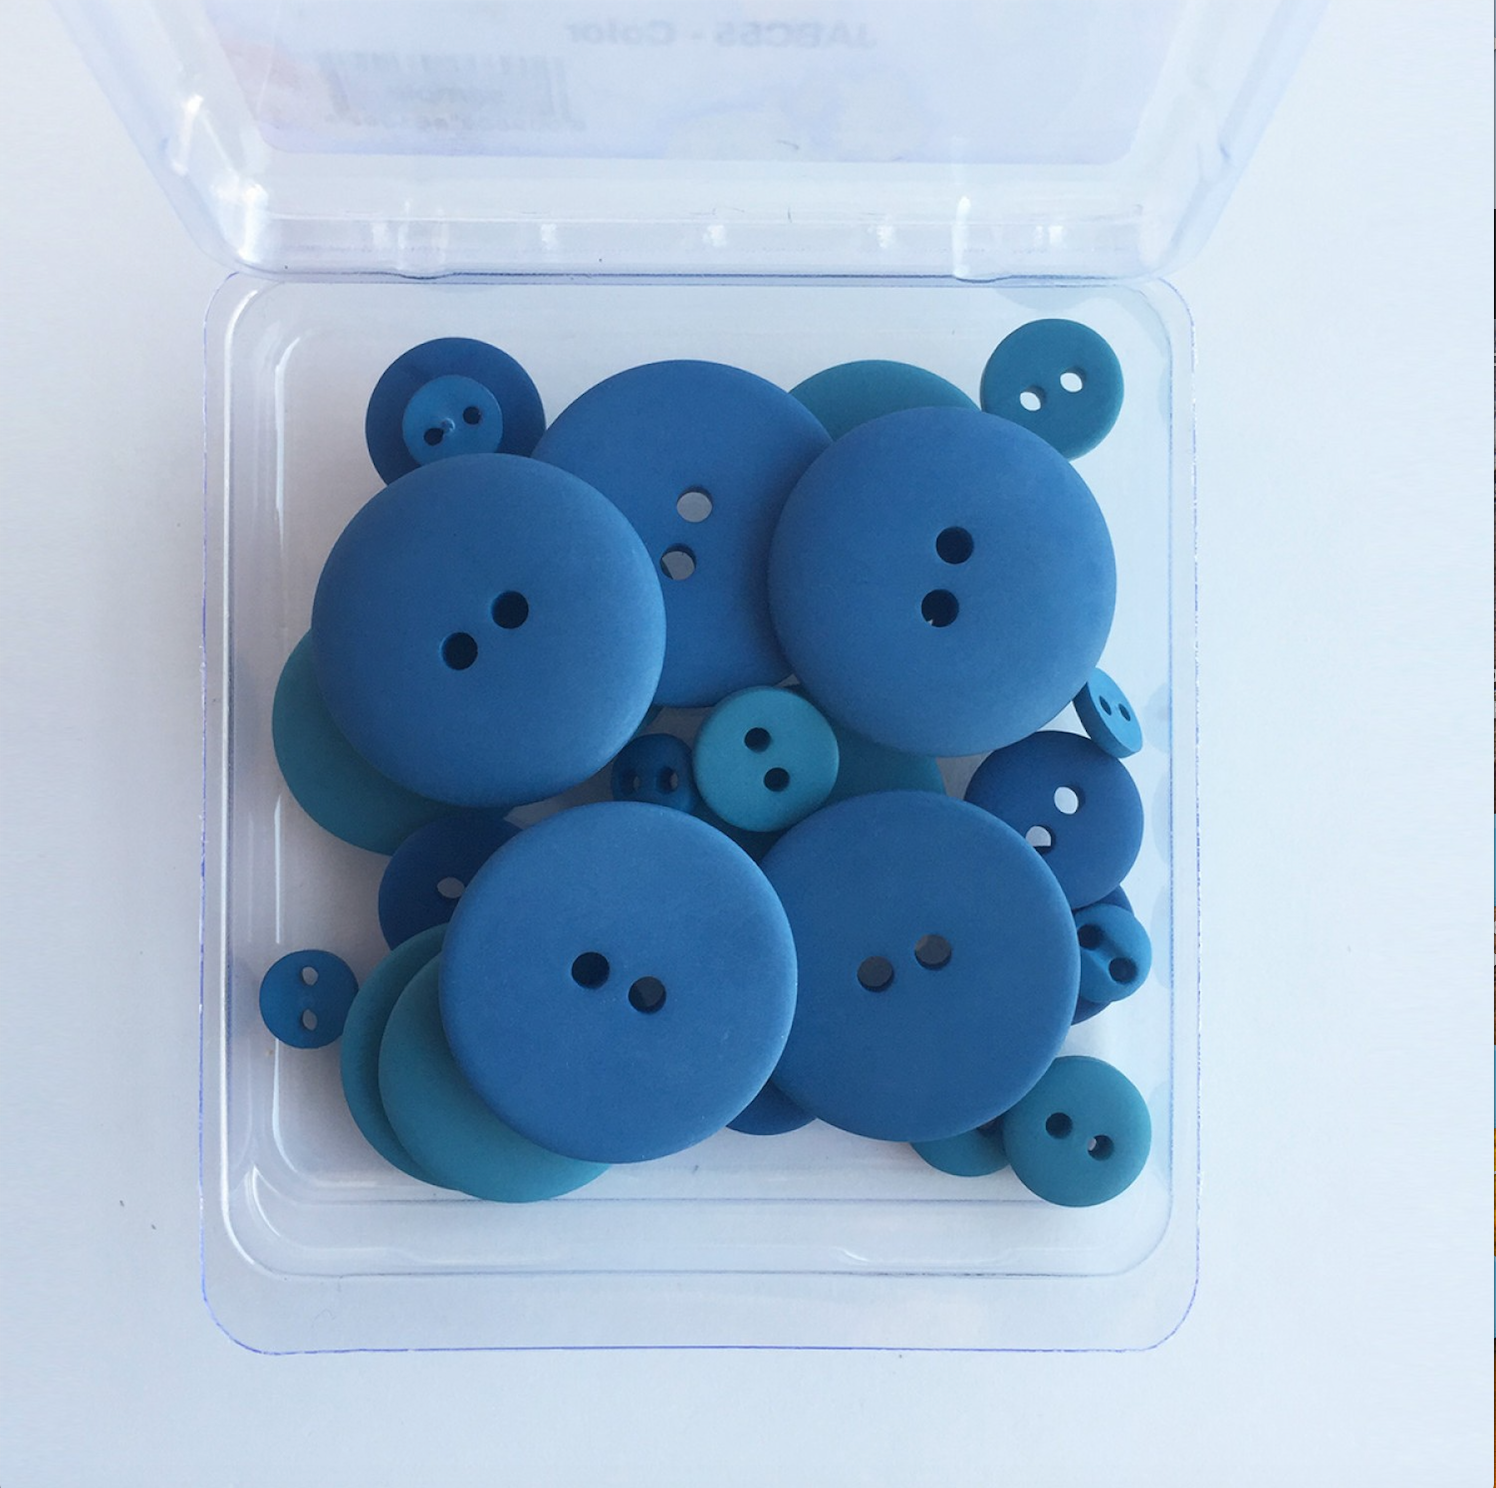 Photo by JustAnotherButtonCompany.com [image_link]